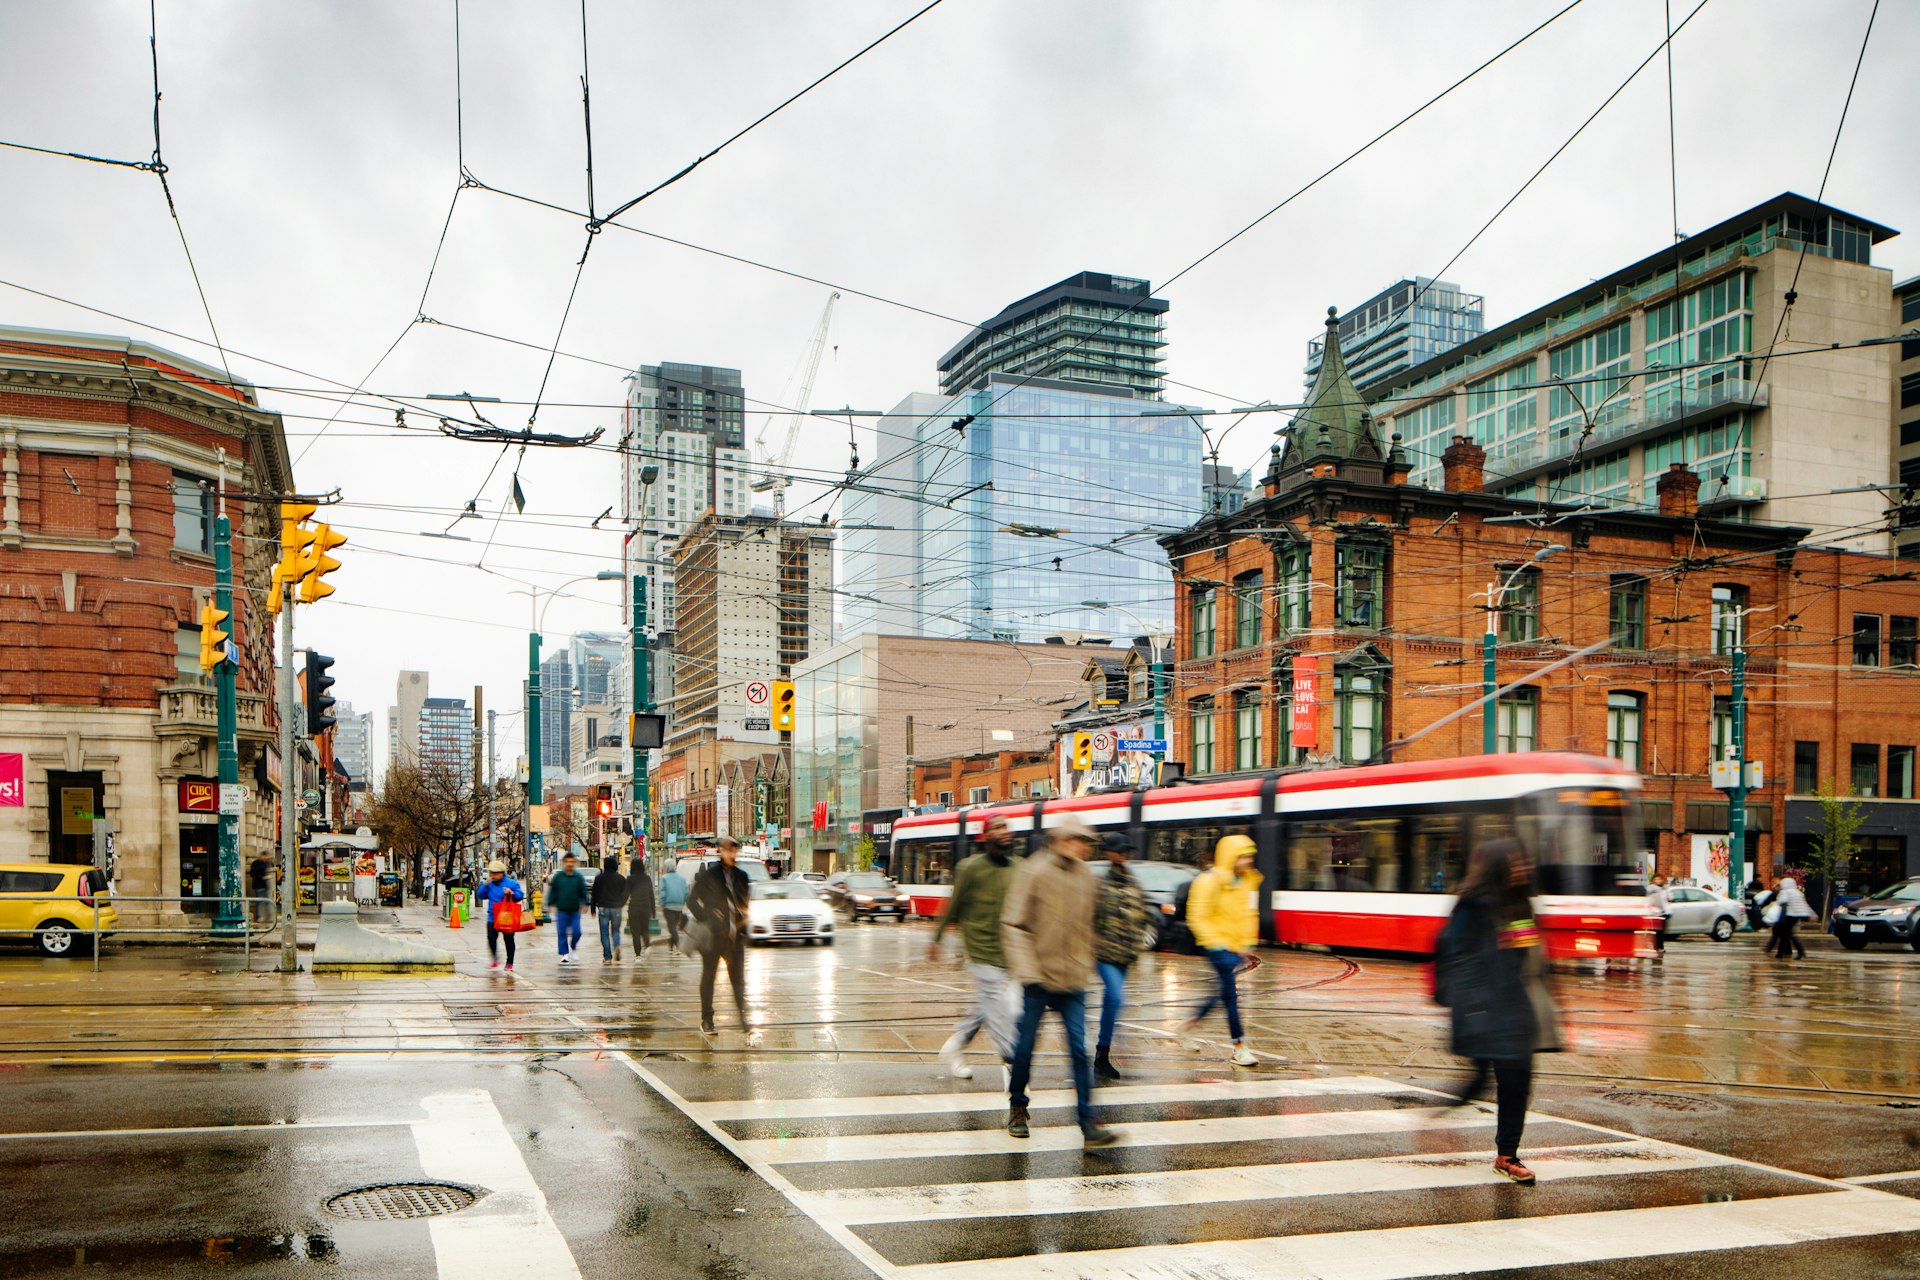 People cross a busy street in Toronto on a cloudy day